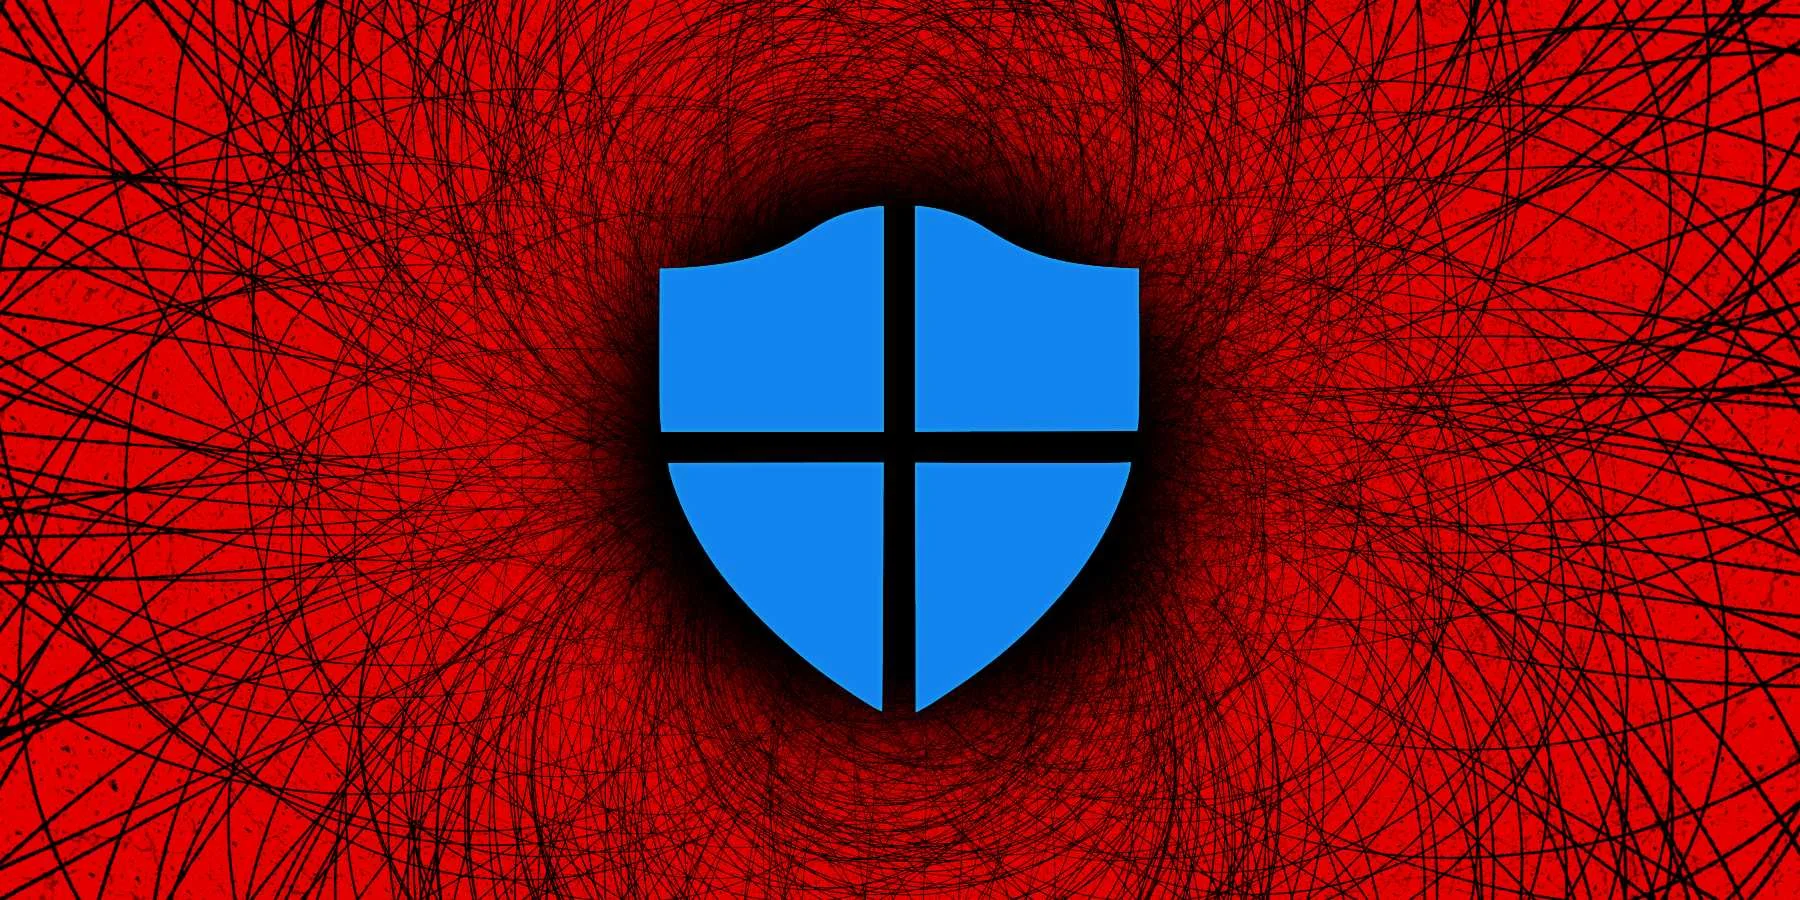 Windows Defender slows down PC performance. What to do?